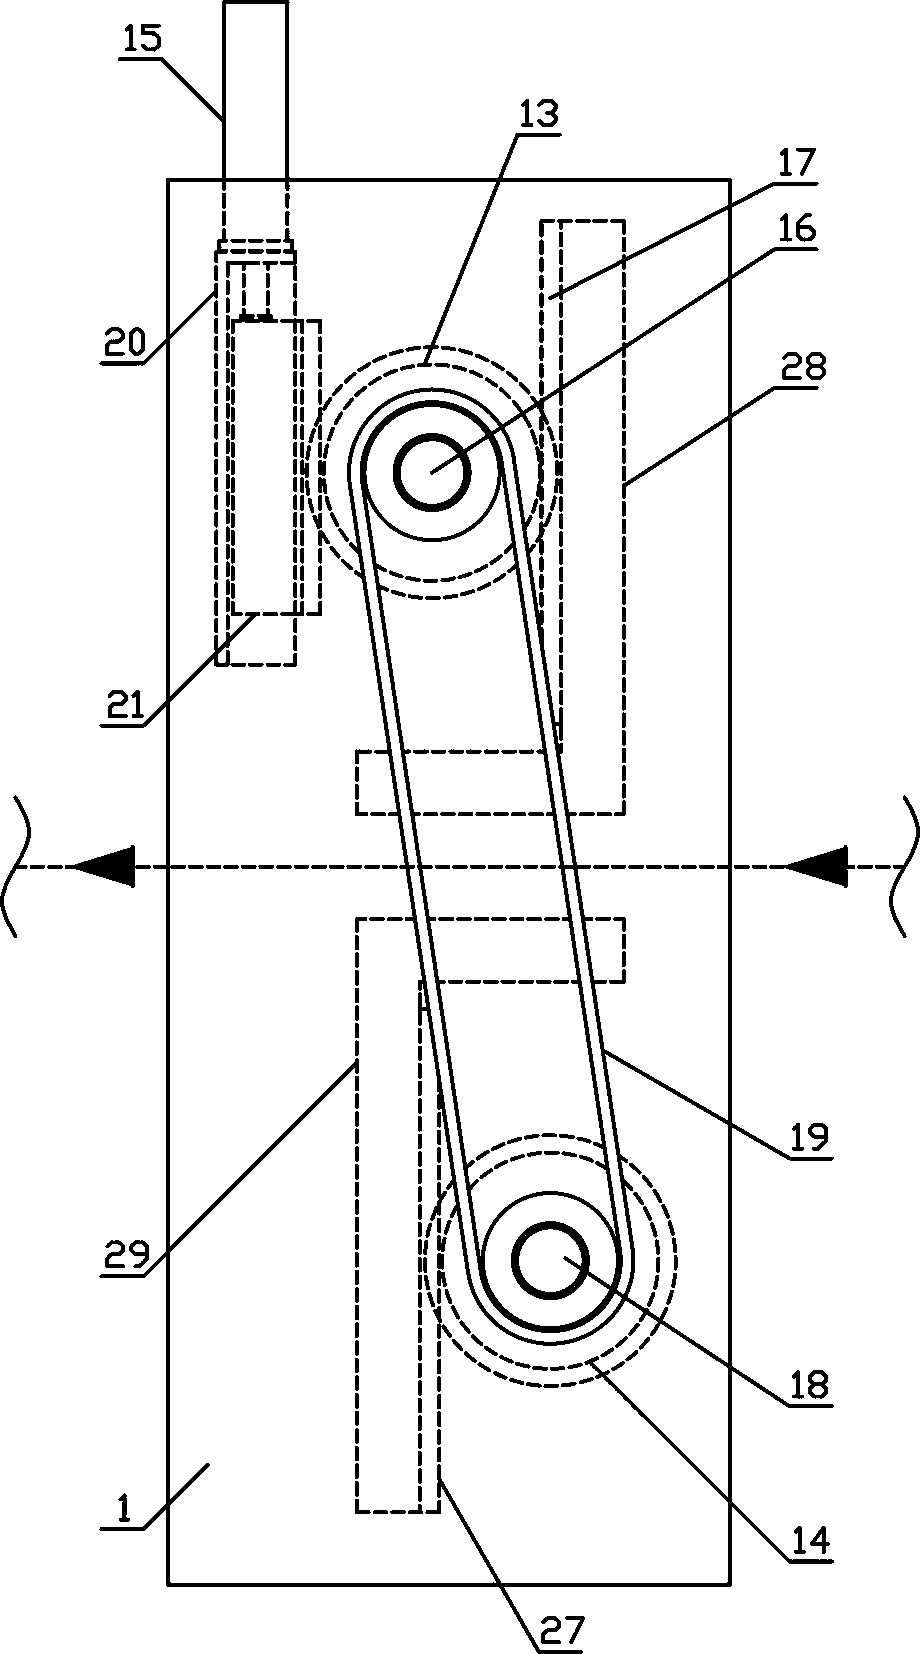 Compressing and drafting mechanism used for yarns